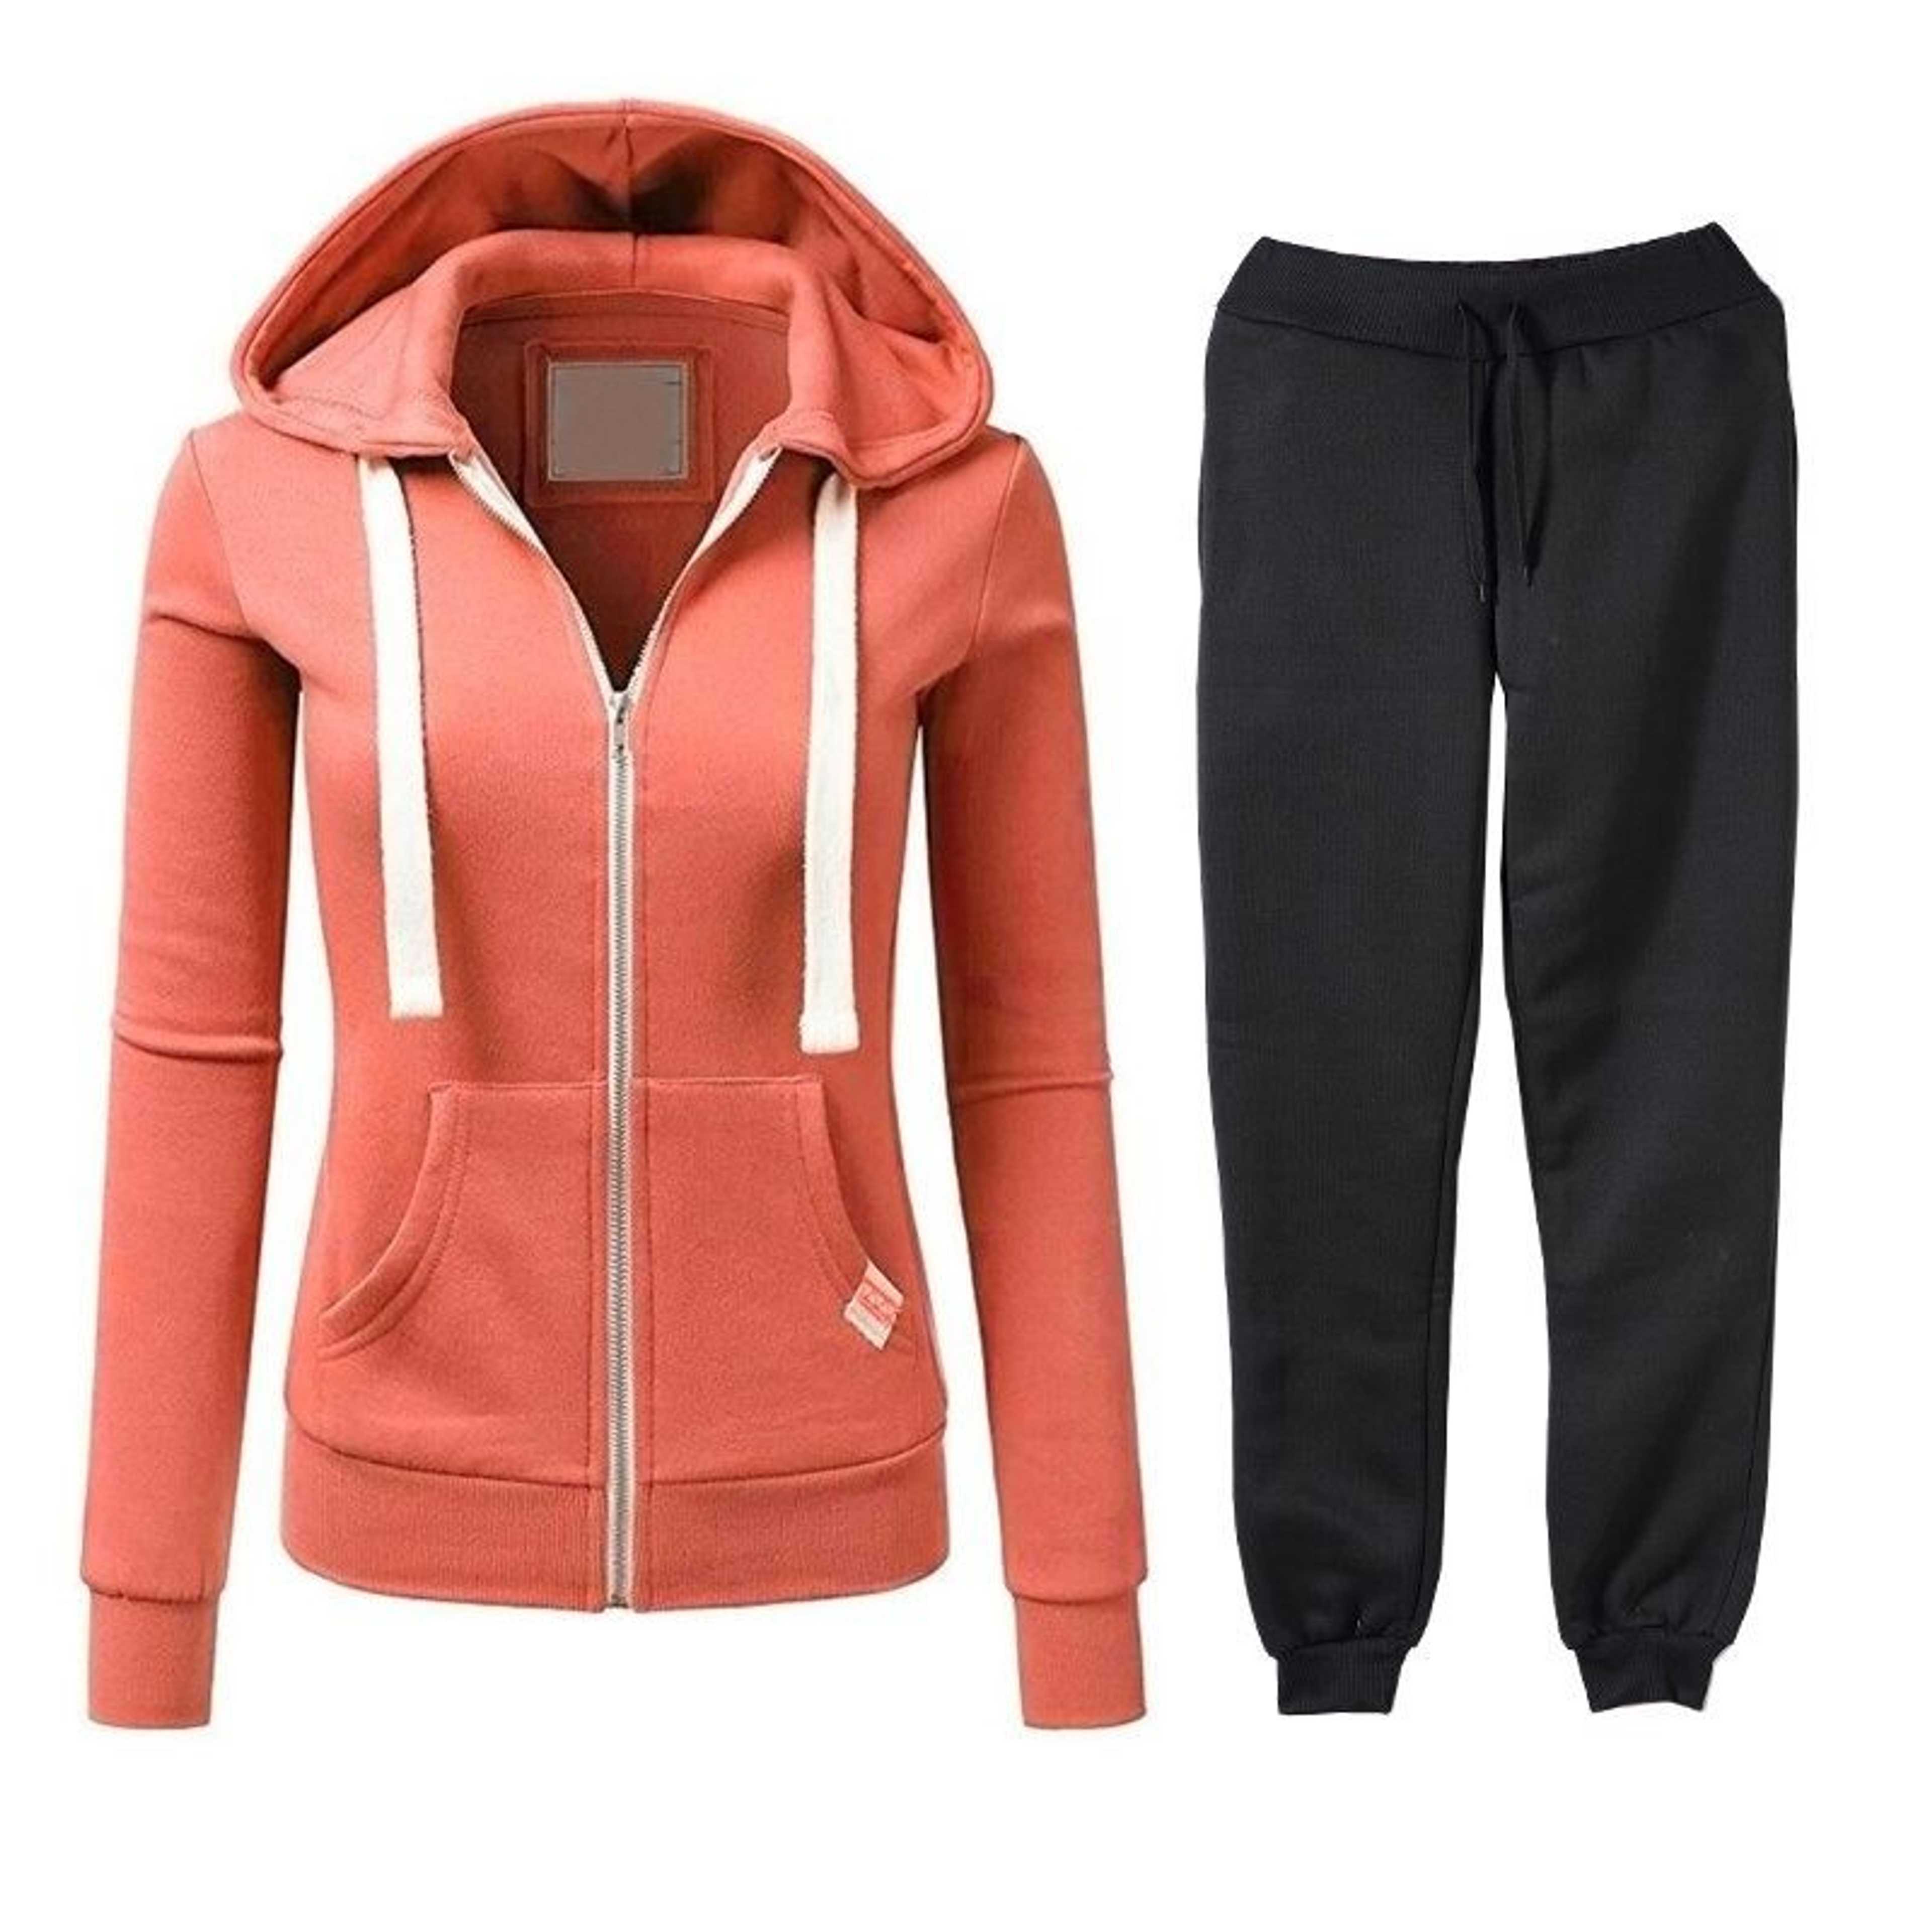 Track Suits for Women with Zipper Hoodie in Peach Color